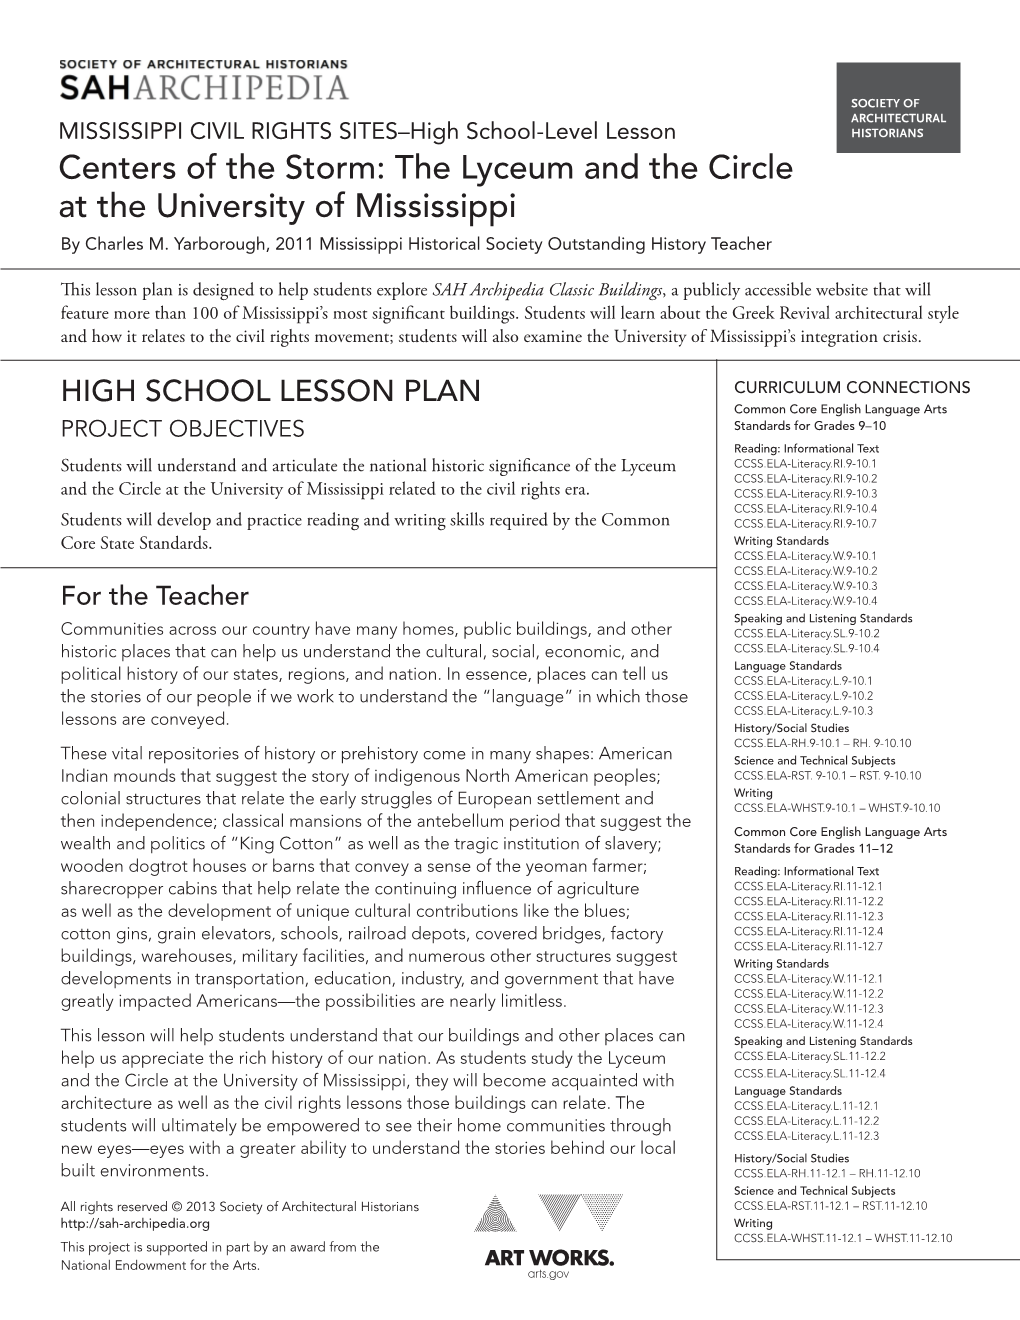 The Lyceum and the Circle at the University of Mississippi by Charles M